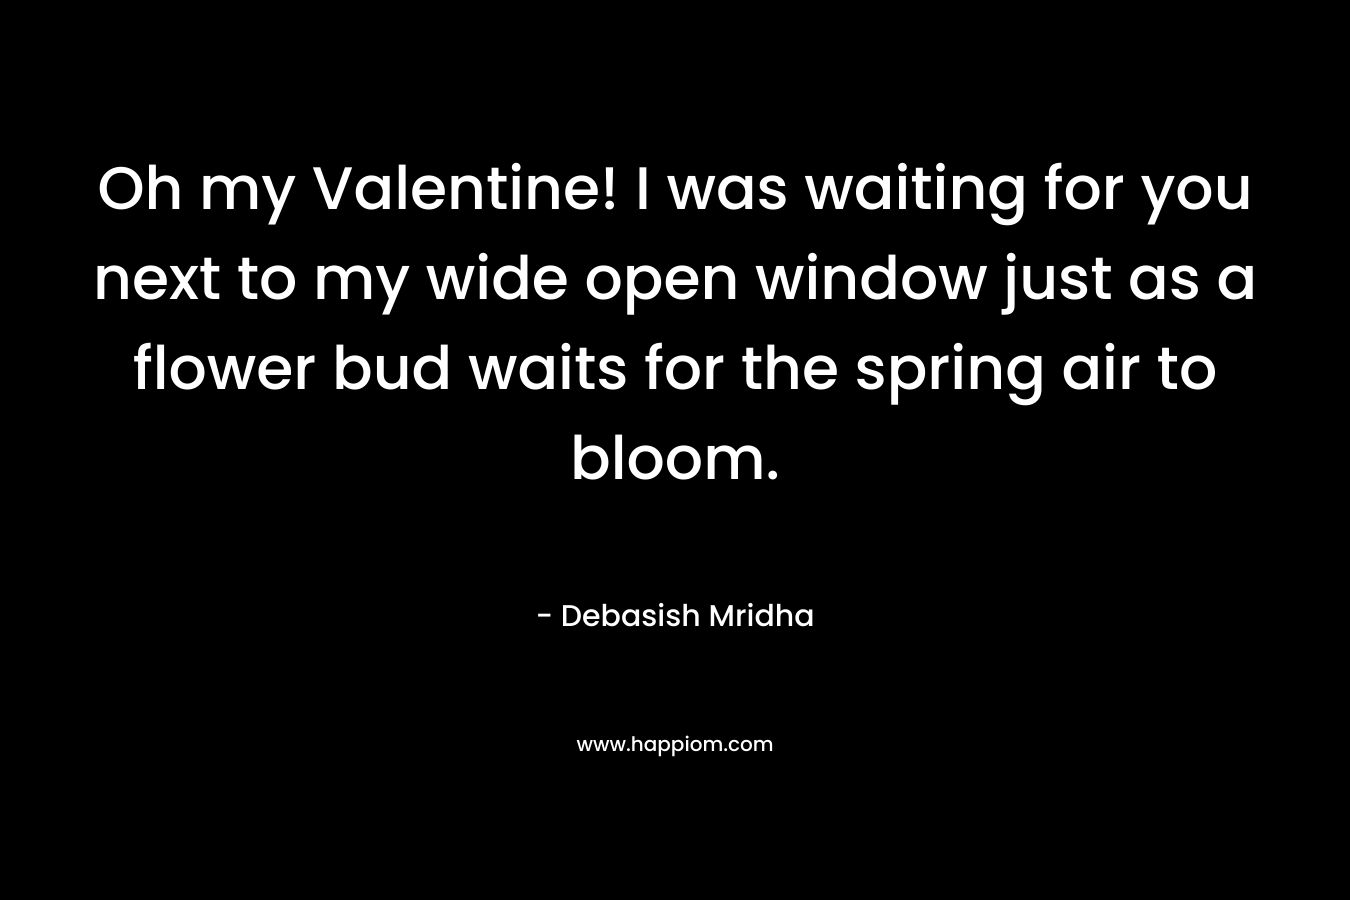 Oh my Valentine! I was waiting for you next to my wide open window just as a flower bud waits for the spring air to bloom.